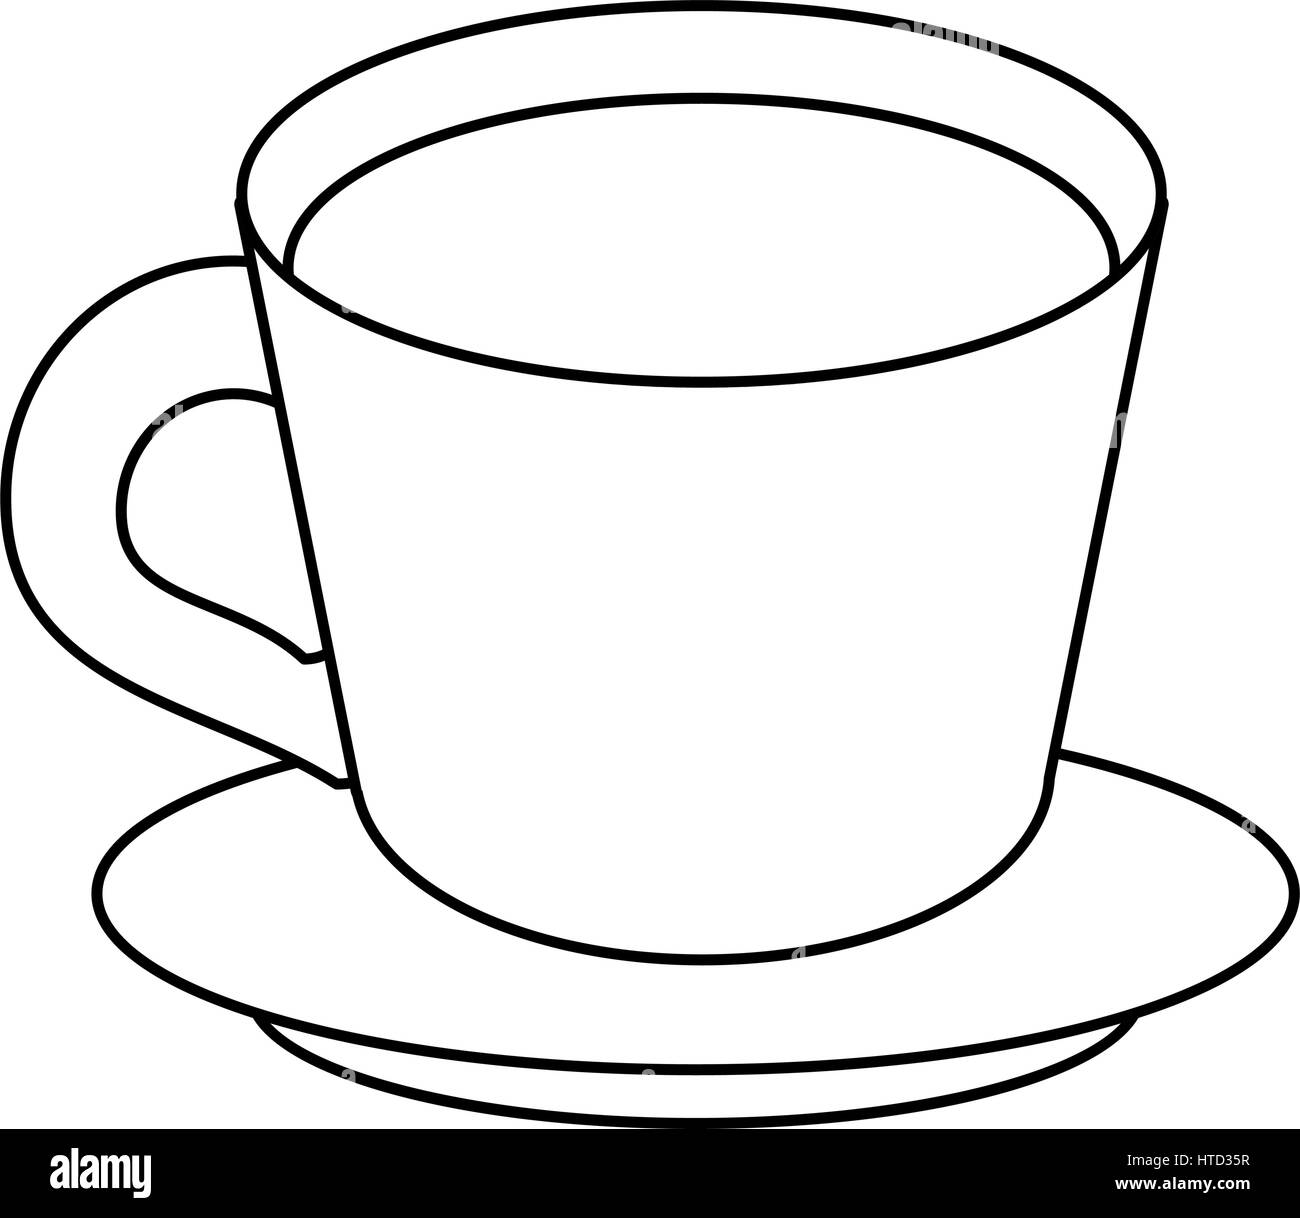 Breakfast Table Cup Coffee Plate Cookies Stock Vector (Royalty Free)  2005623152 | Shutterstock